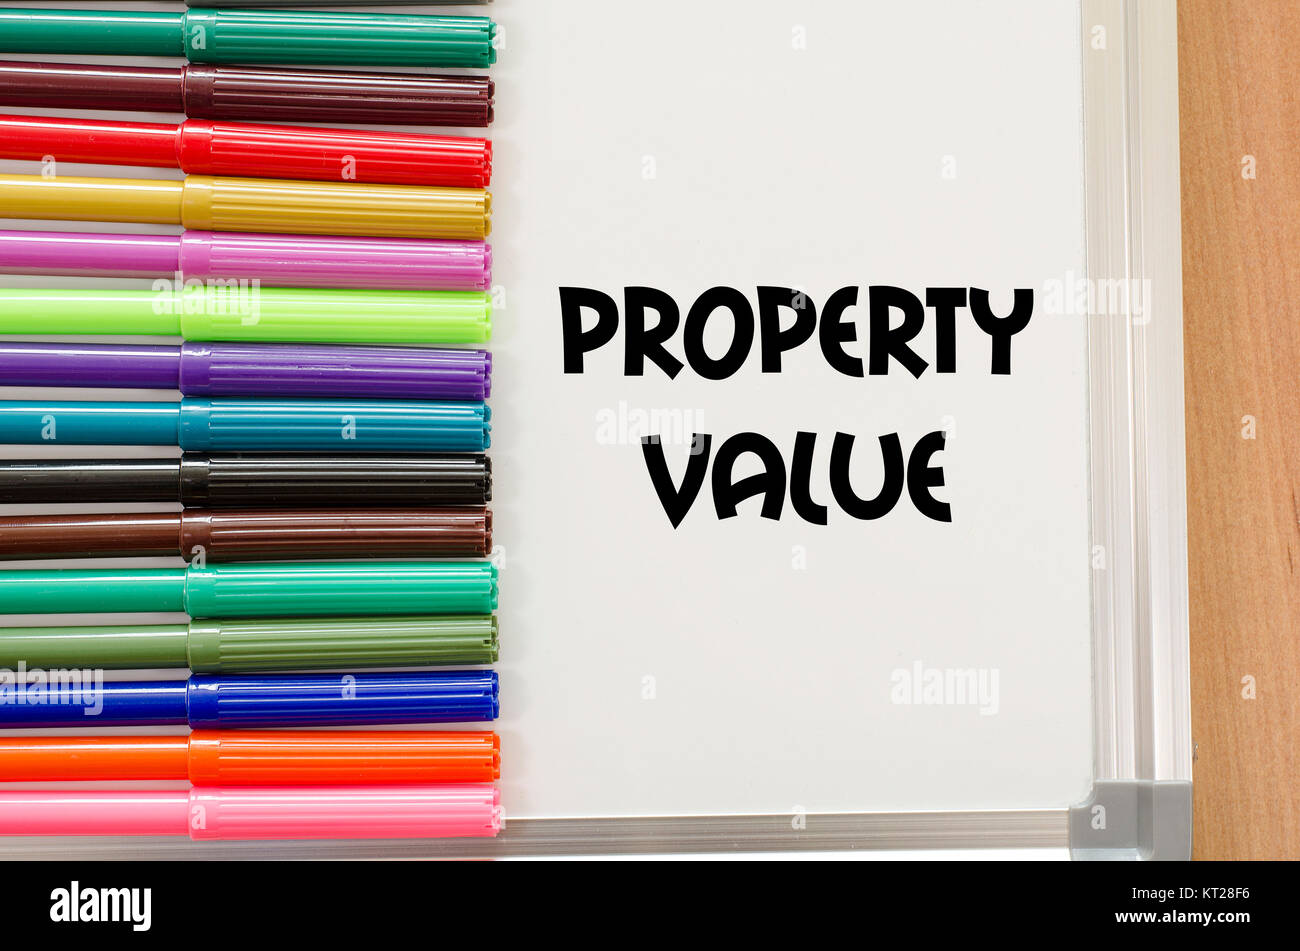 Property value text concept Stock Photo